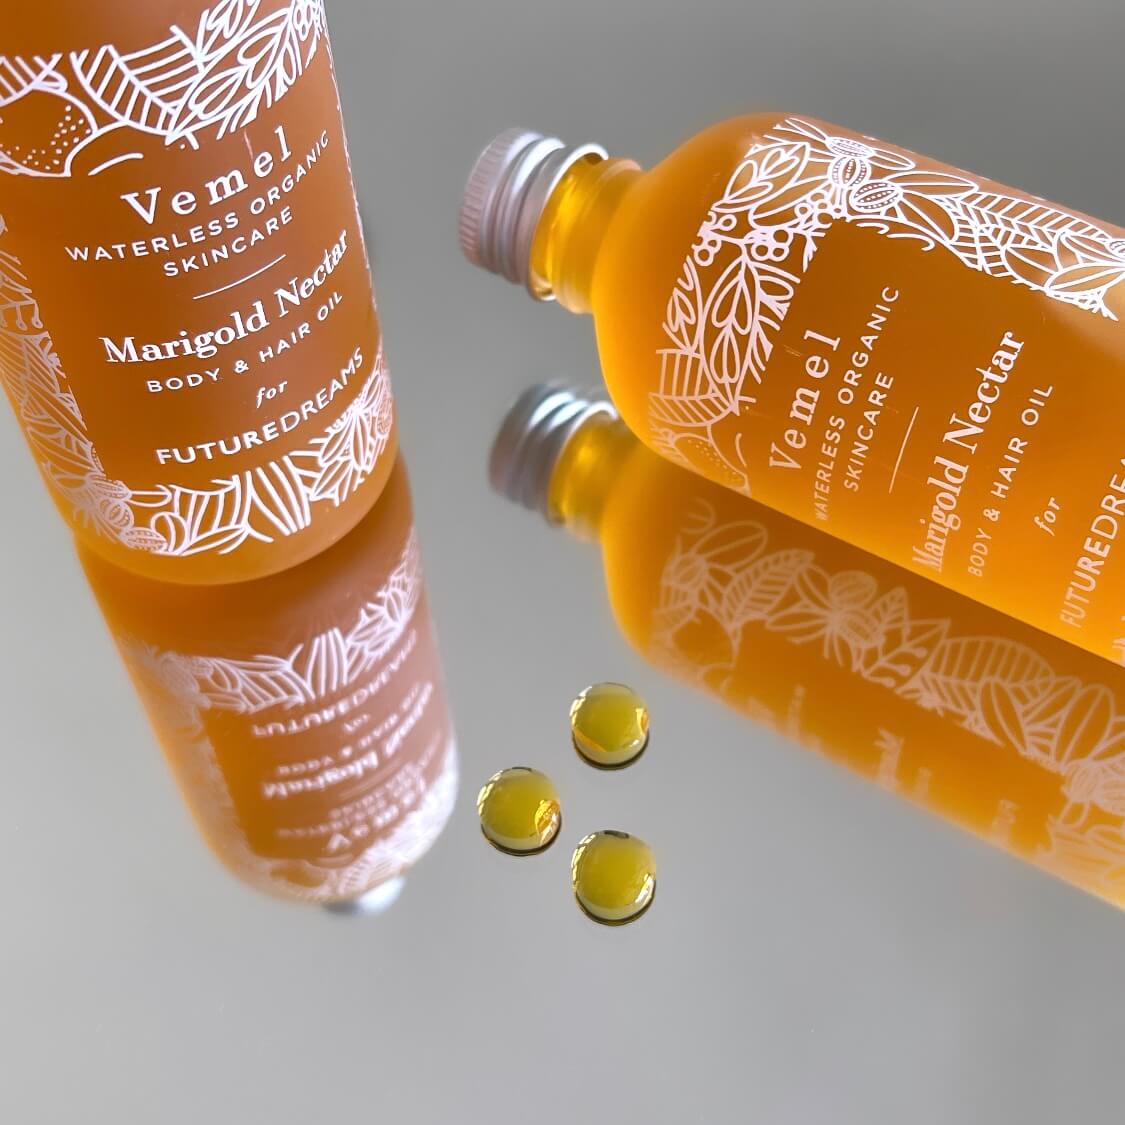 Body and Hair oil - Limited Edition Marigold Nectar - Plastic Free Amsterdam